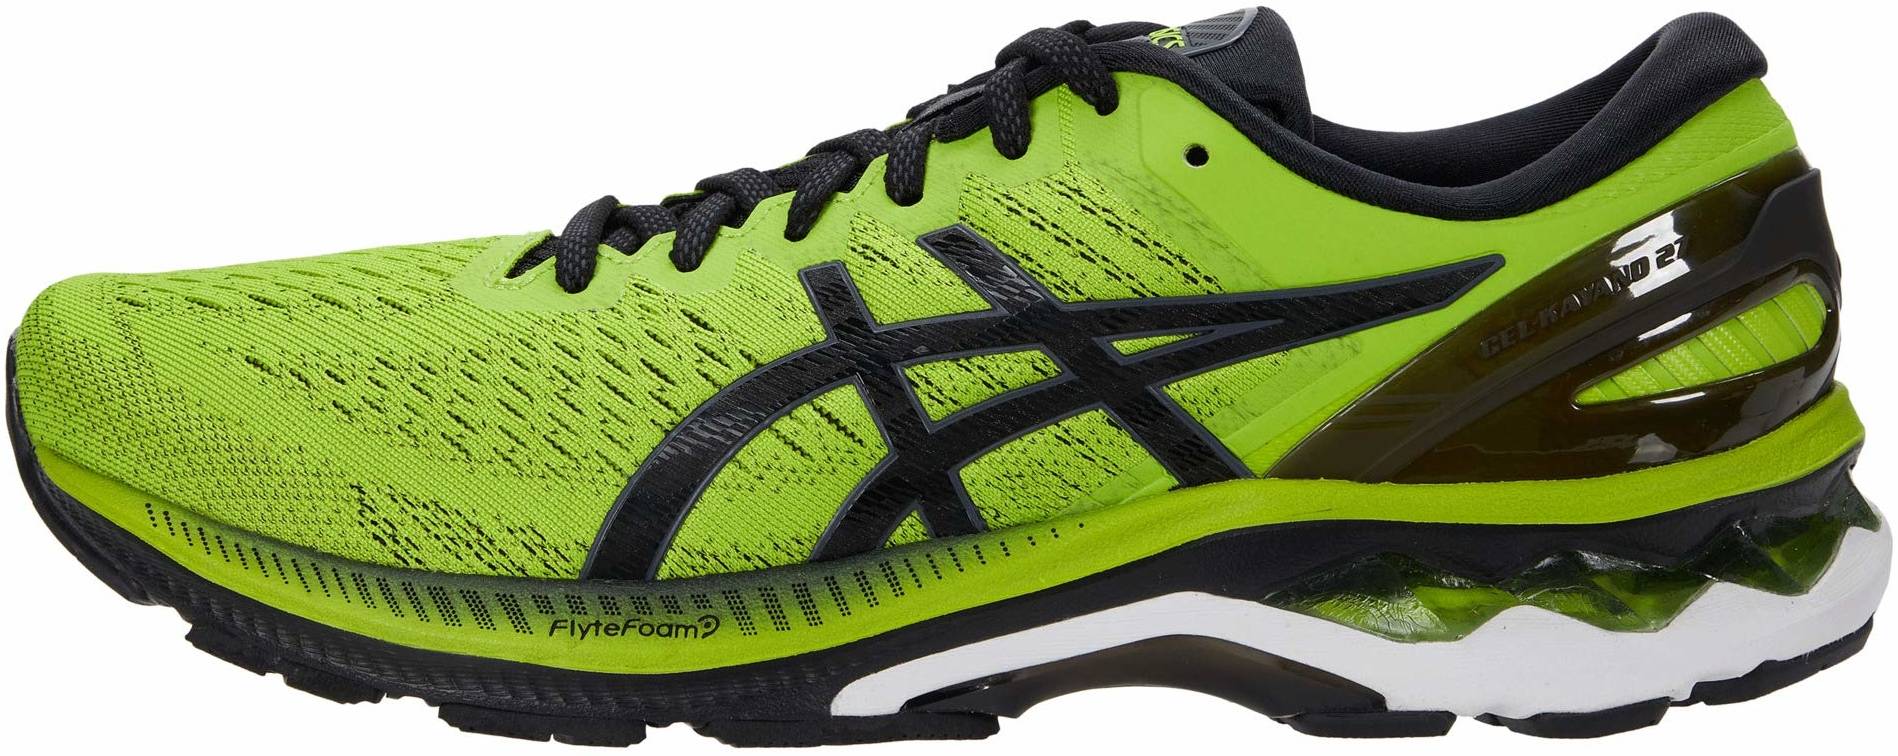 lime green running shoes mens